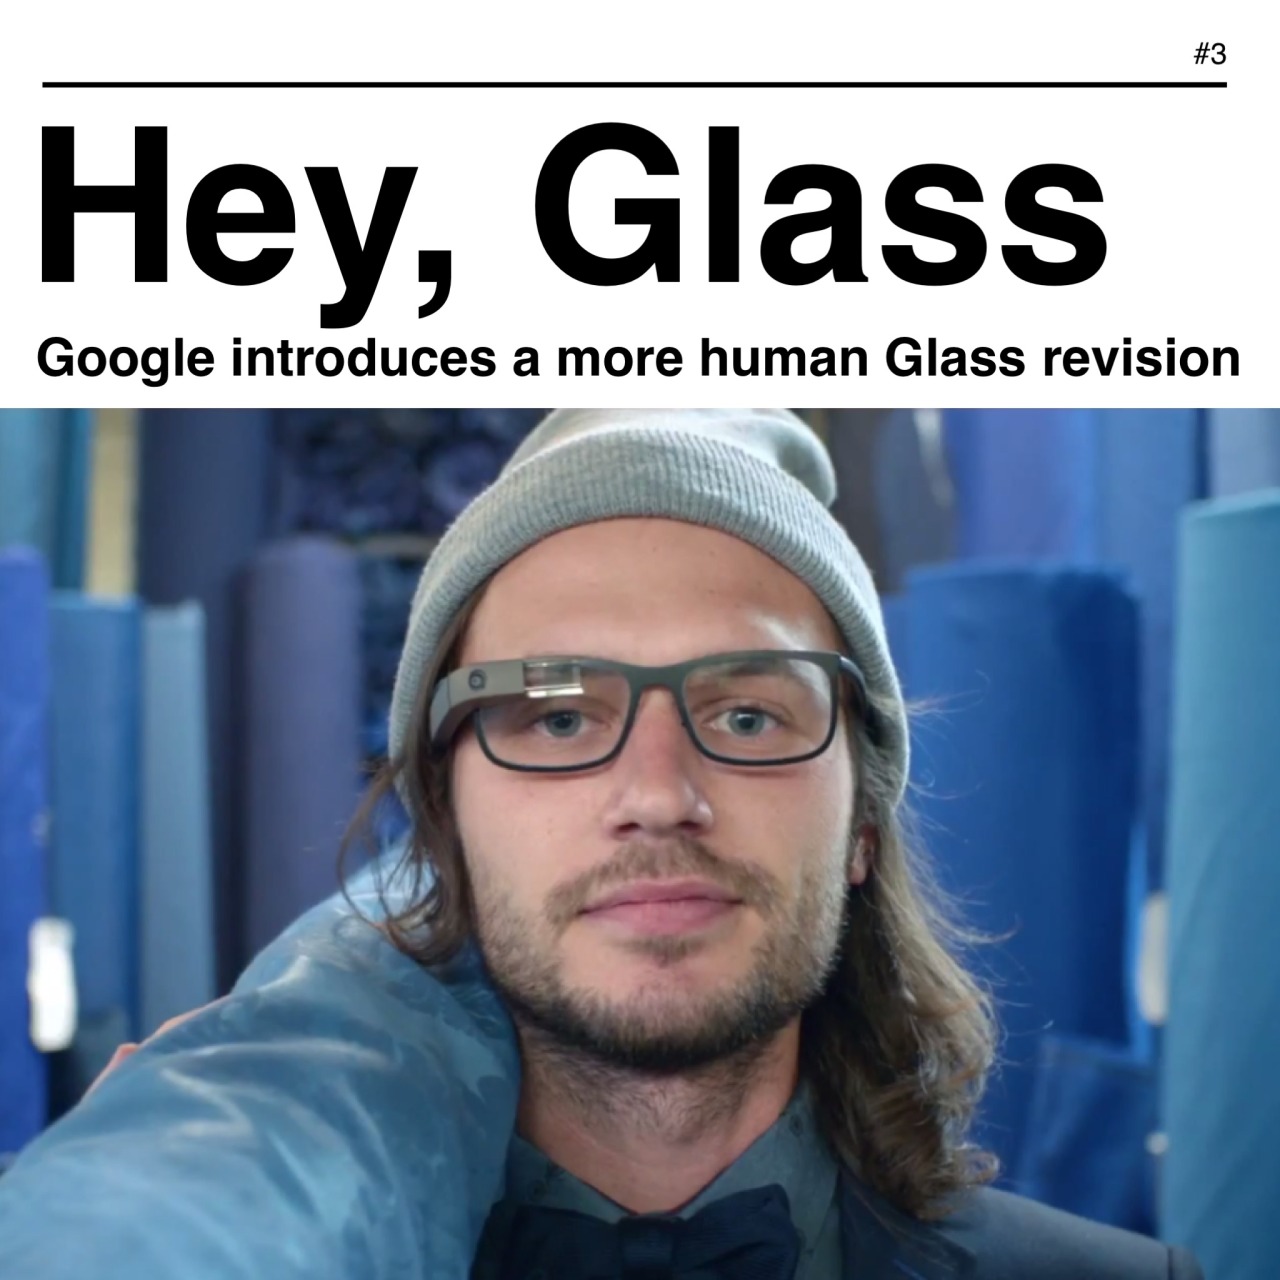 The Google Glass Titanium Collection proves that Mountain View’s increasingly elegant design prowess translates well into the physical world. Where Glass rev. one smacked of cybernetic headgear Titanium’s “silhouette” aesthetic comes across as...